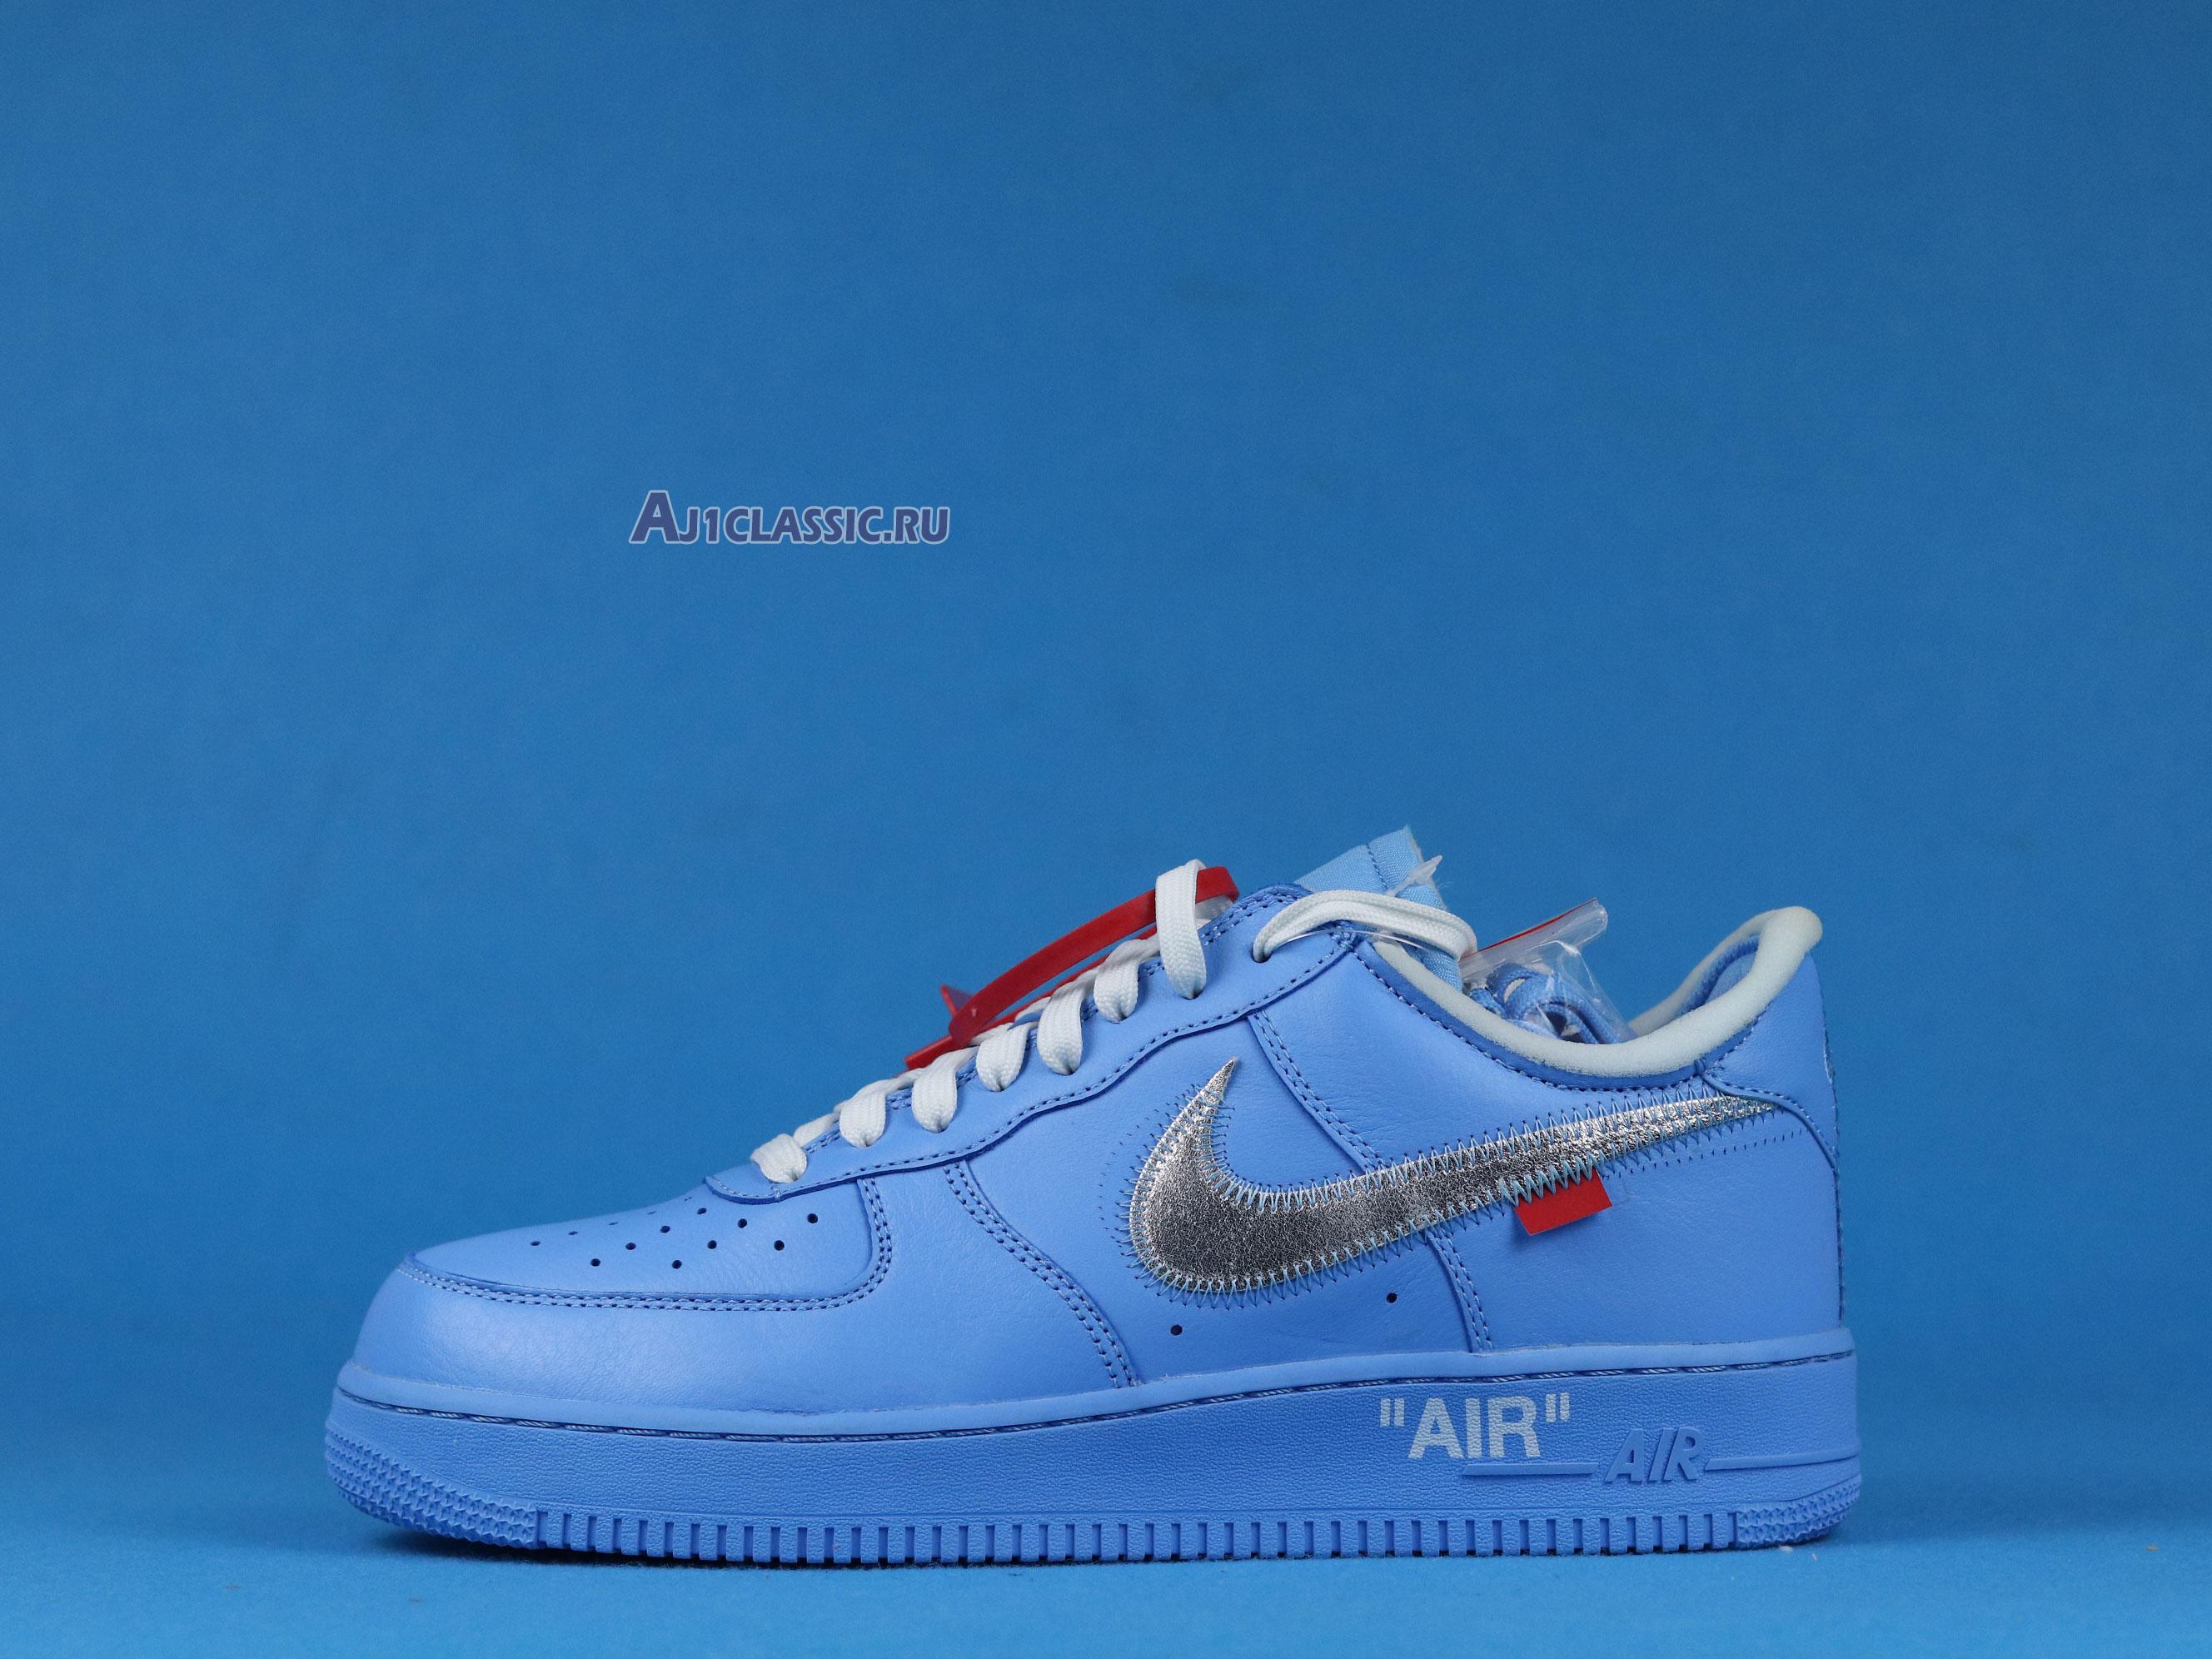 Off-White x Nike Air Force 1 Low 07 "MCA" CI1173-400